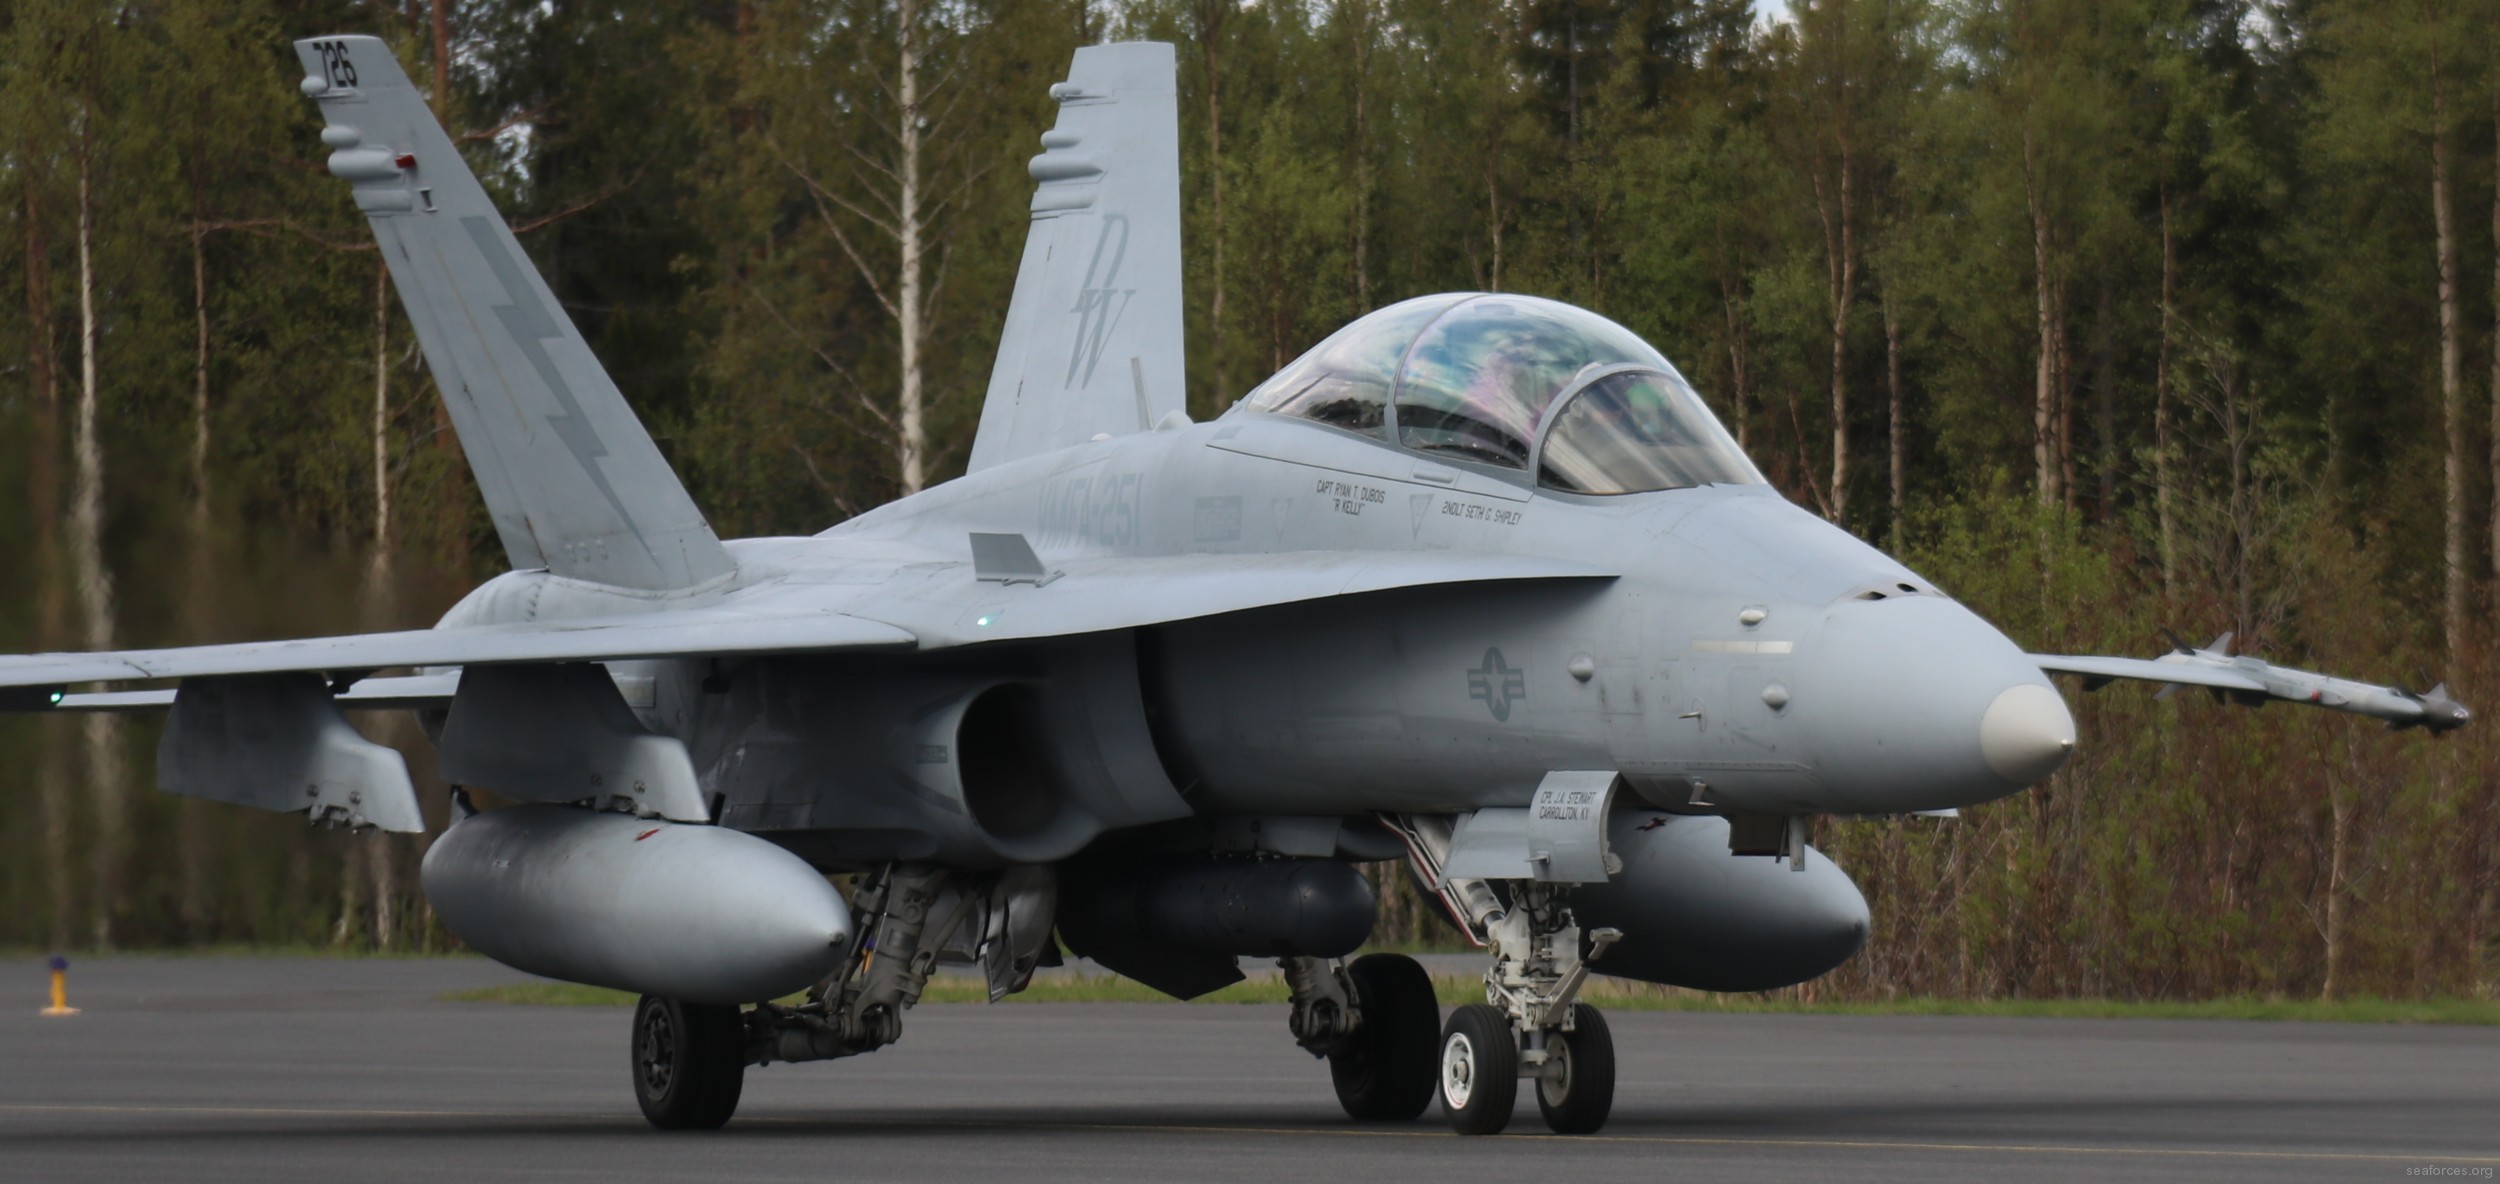 vmfa-251 thunderbolts marine fighter attack squadron f/a-18d hornet 82 exercise arctic challenge finland